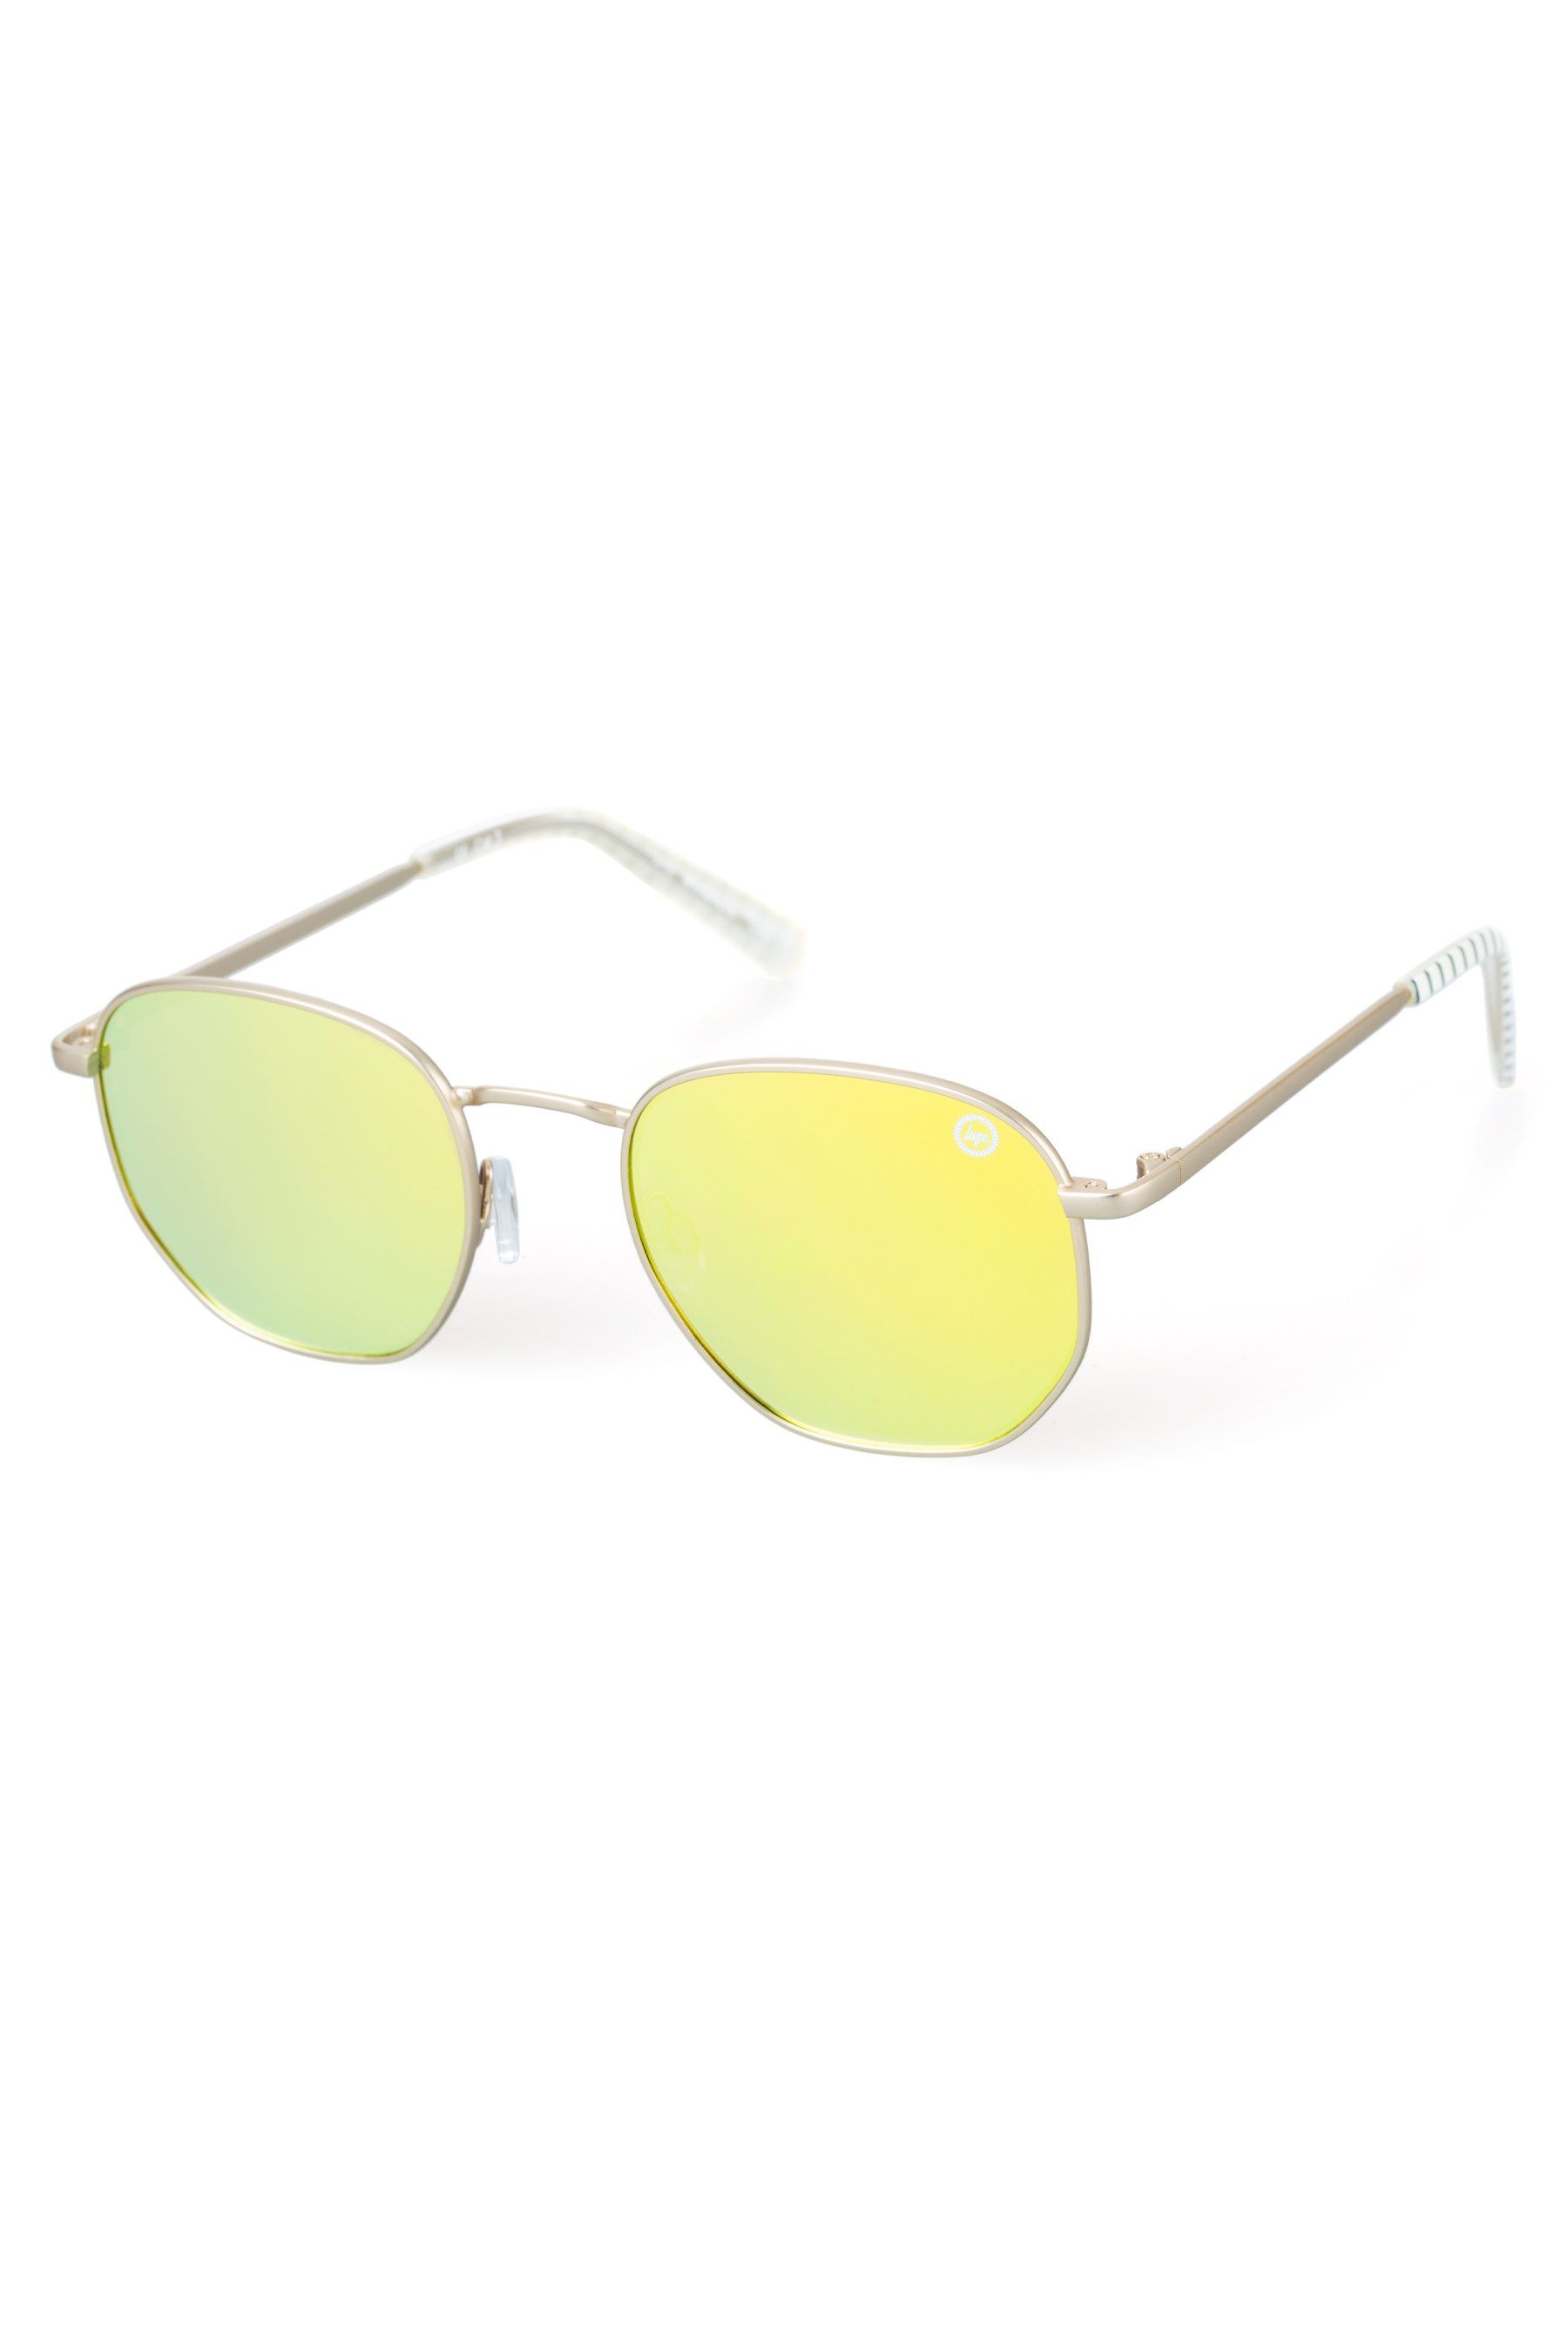 No need for hair of the dog. Disguise your hangover in our range of sunglasses.